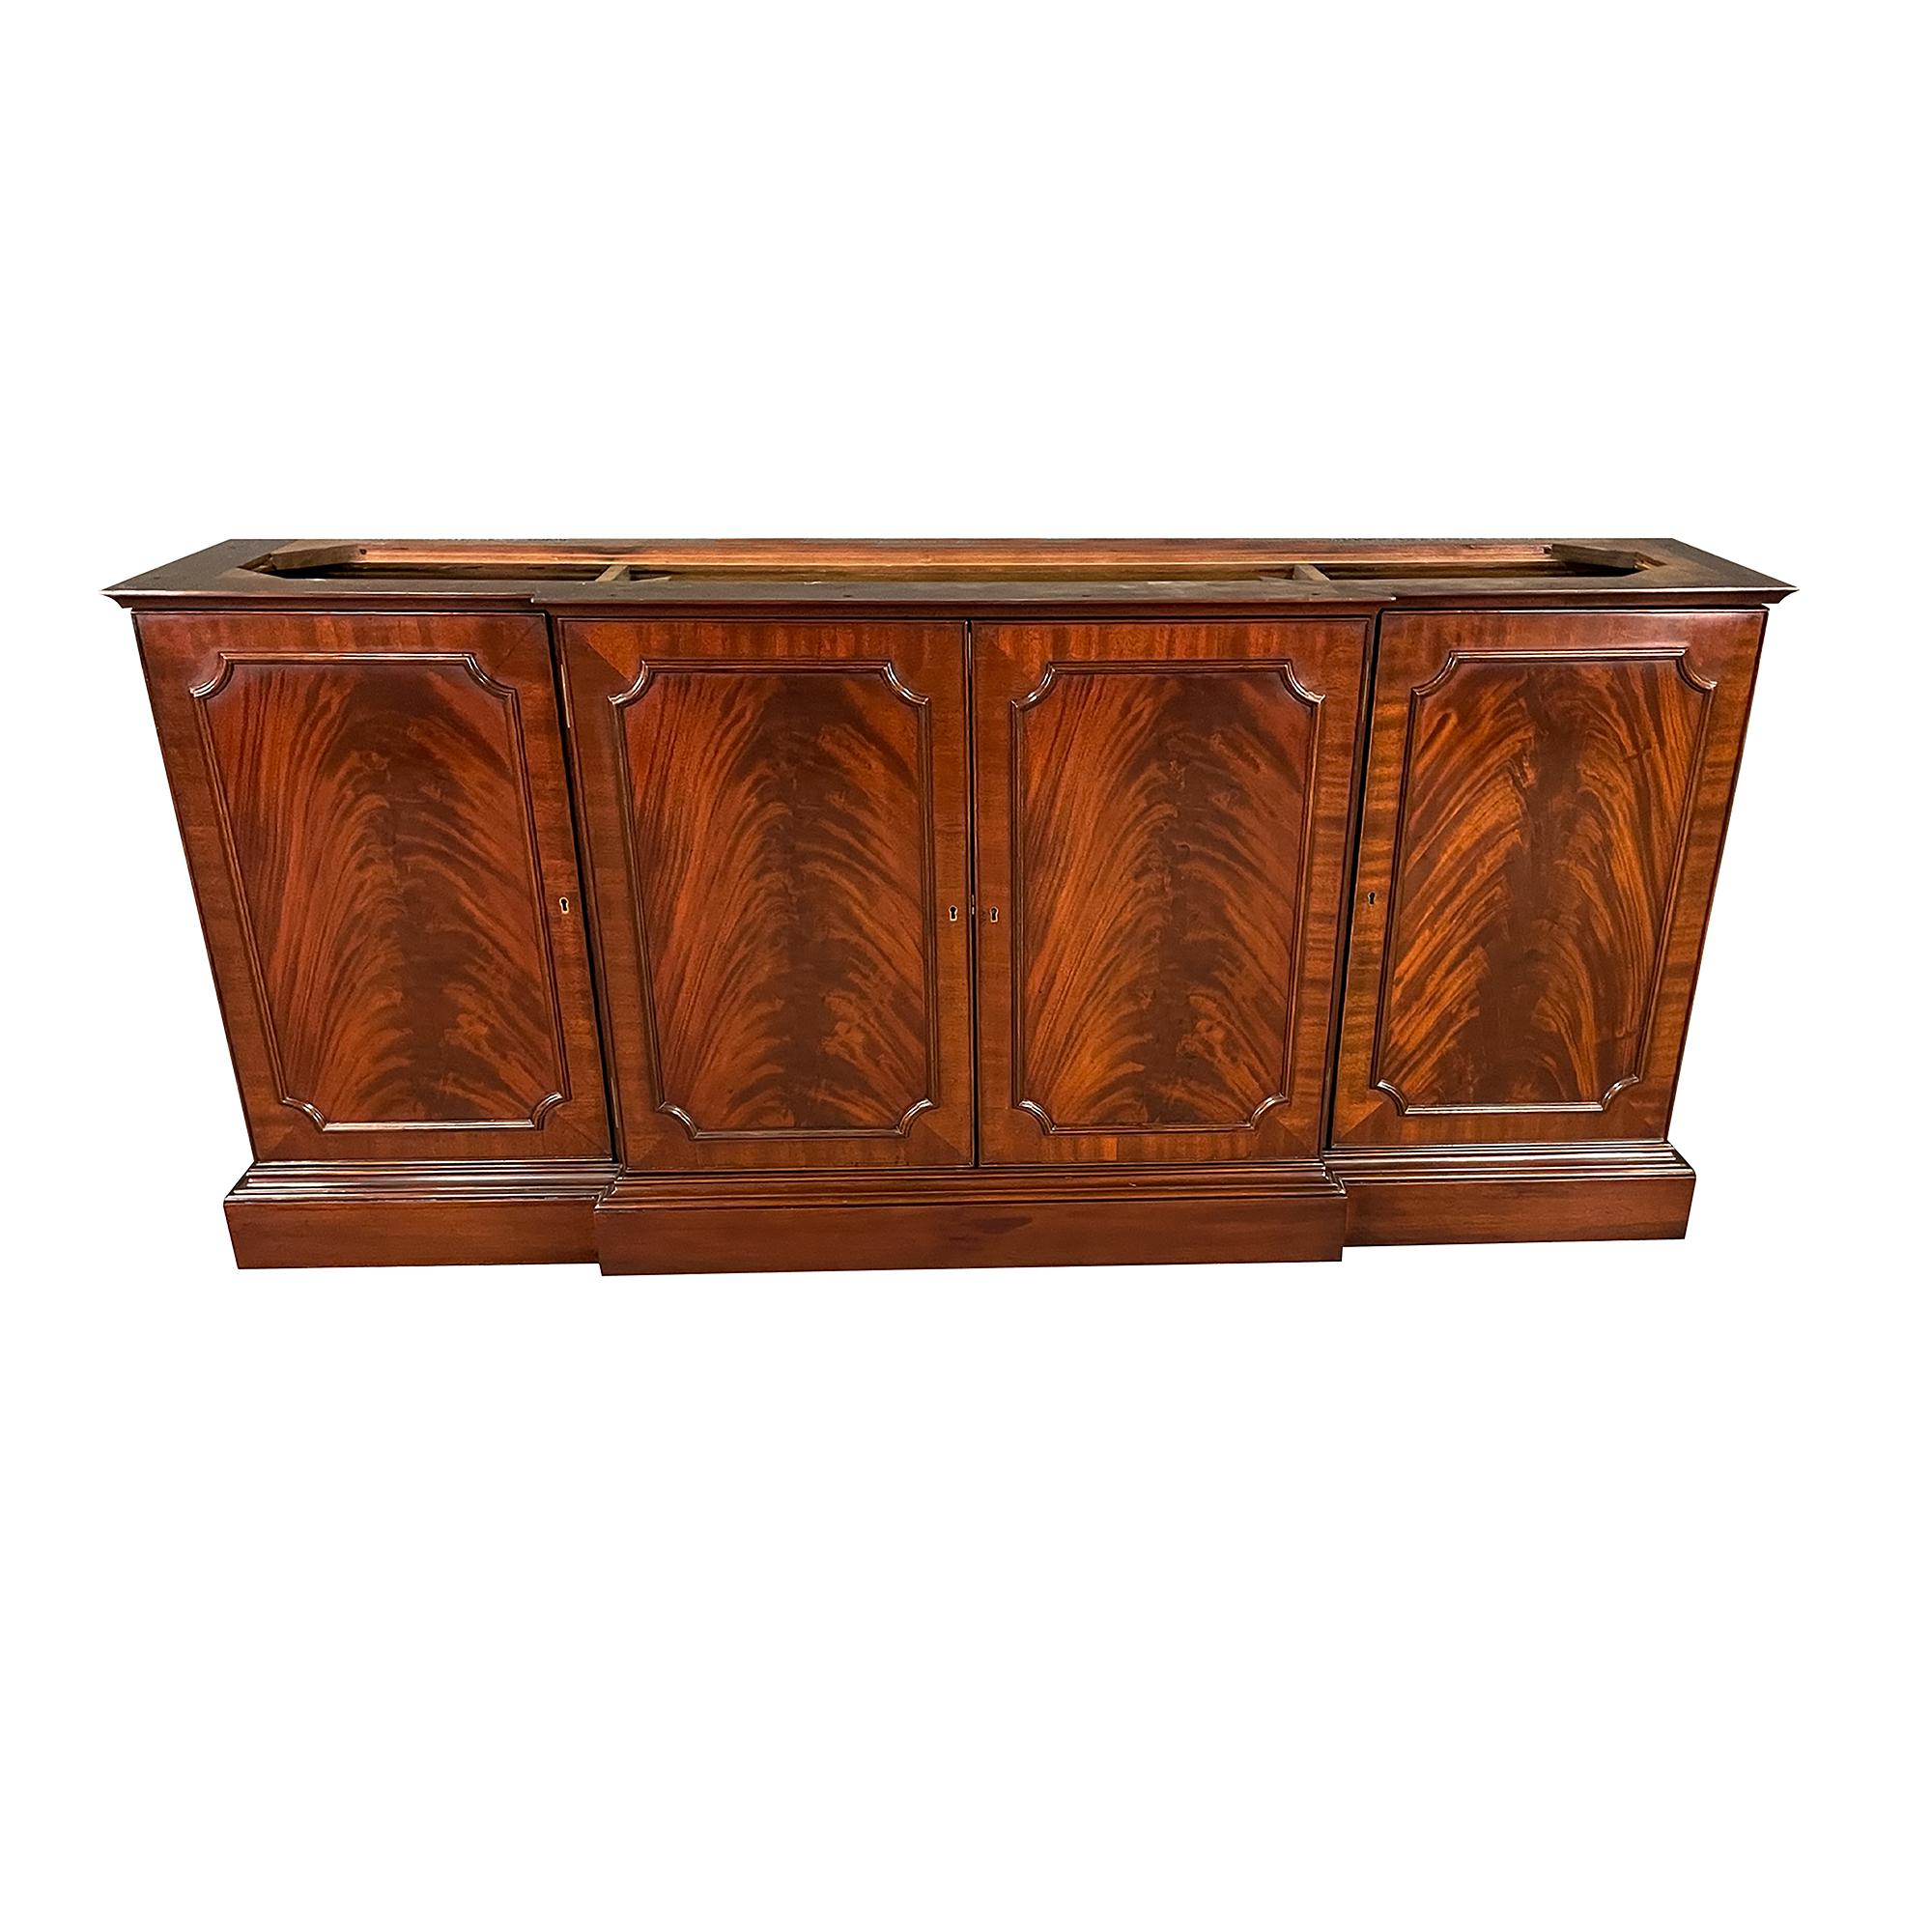 From Niagara Furniture a Councill Mahogany Vintage Breakfront in excellent, ready to use in your home, condition.

Simple yet sophisticated this beautiful Councill Mahogany Vintage Breakfront has everything going for it. This two piece breakfront